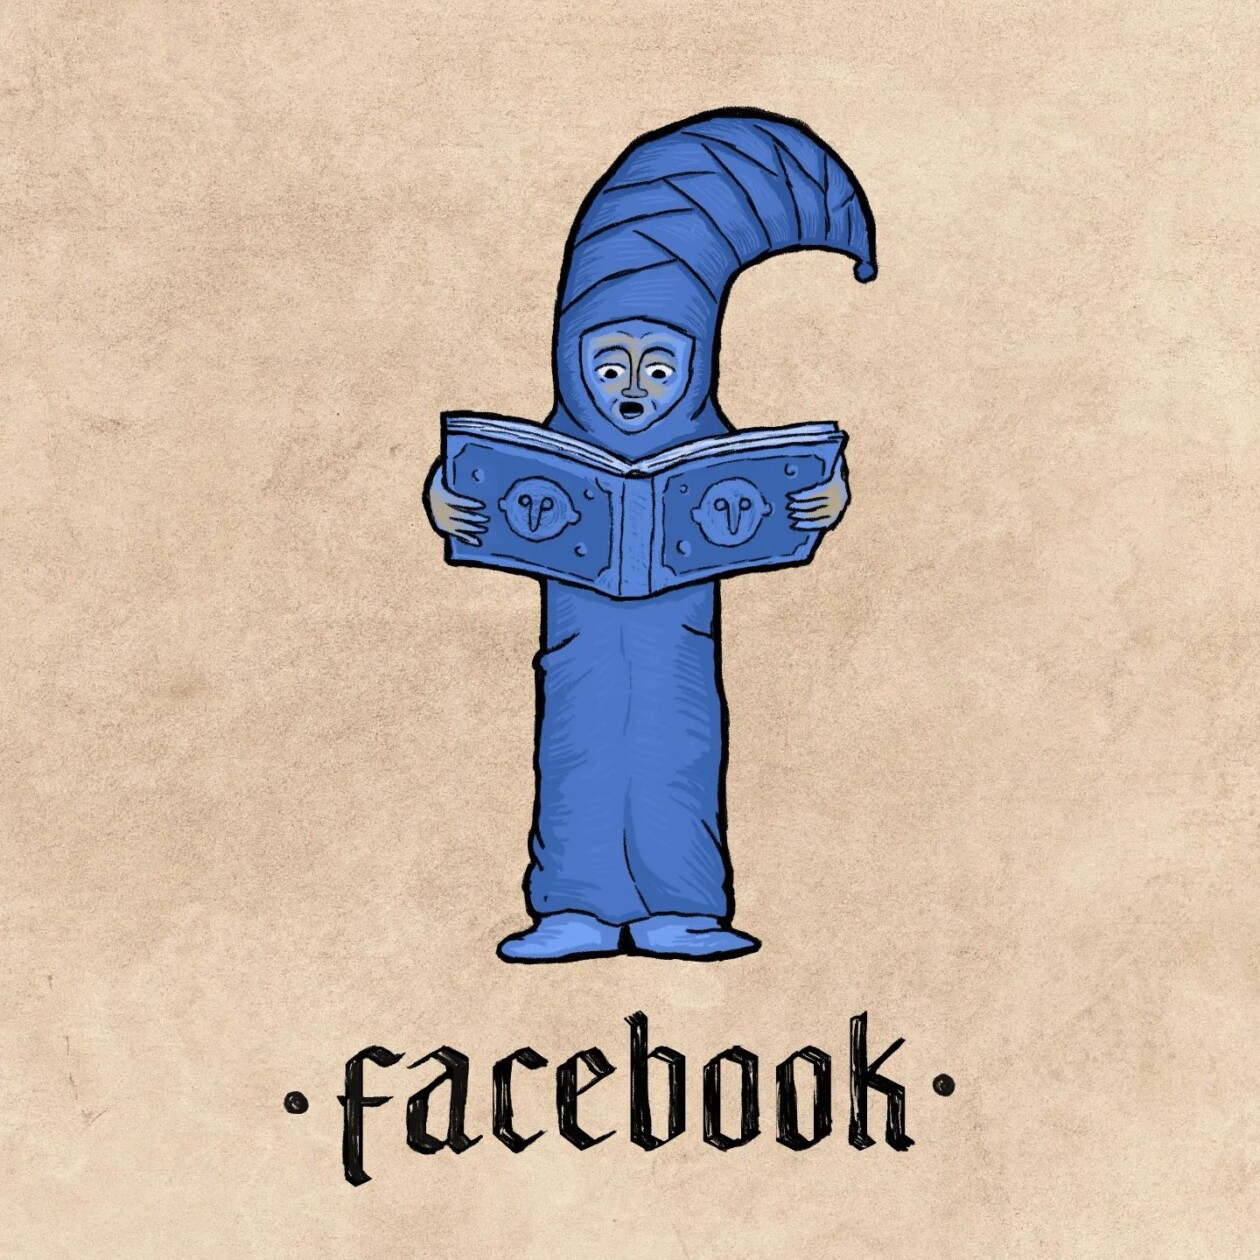 Modern Company Logos Recreated Like They Were Done During The Middle Ages By Ilya Stallone 21